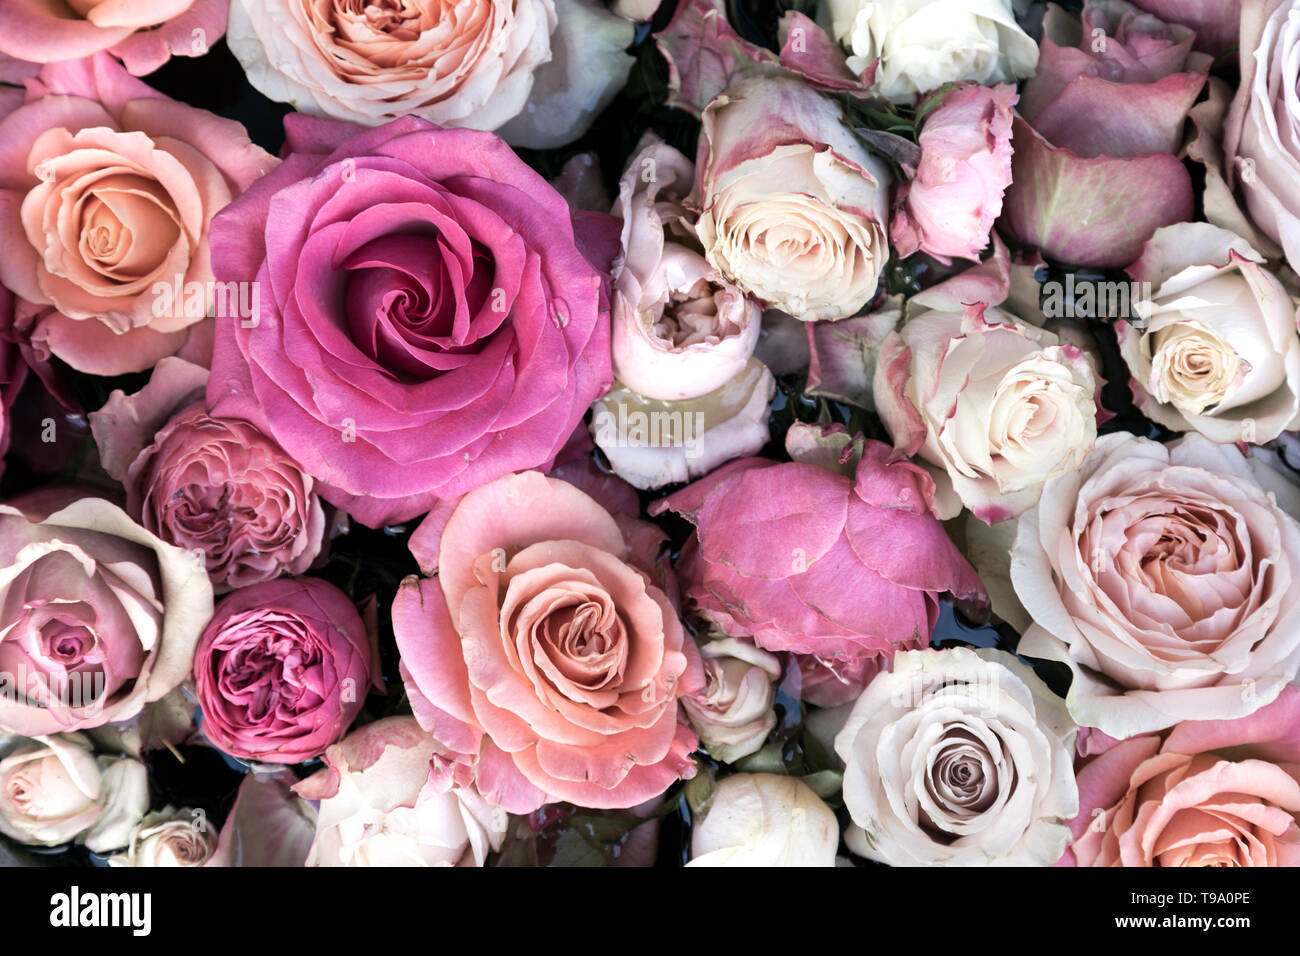 Background of pink and white roses Stock Photo